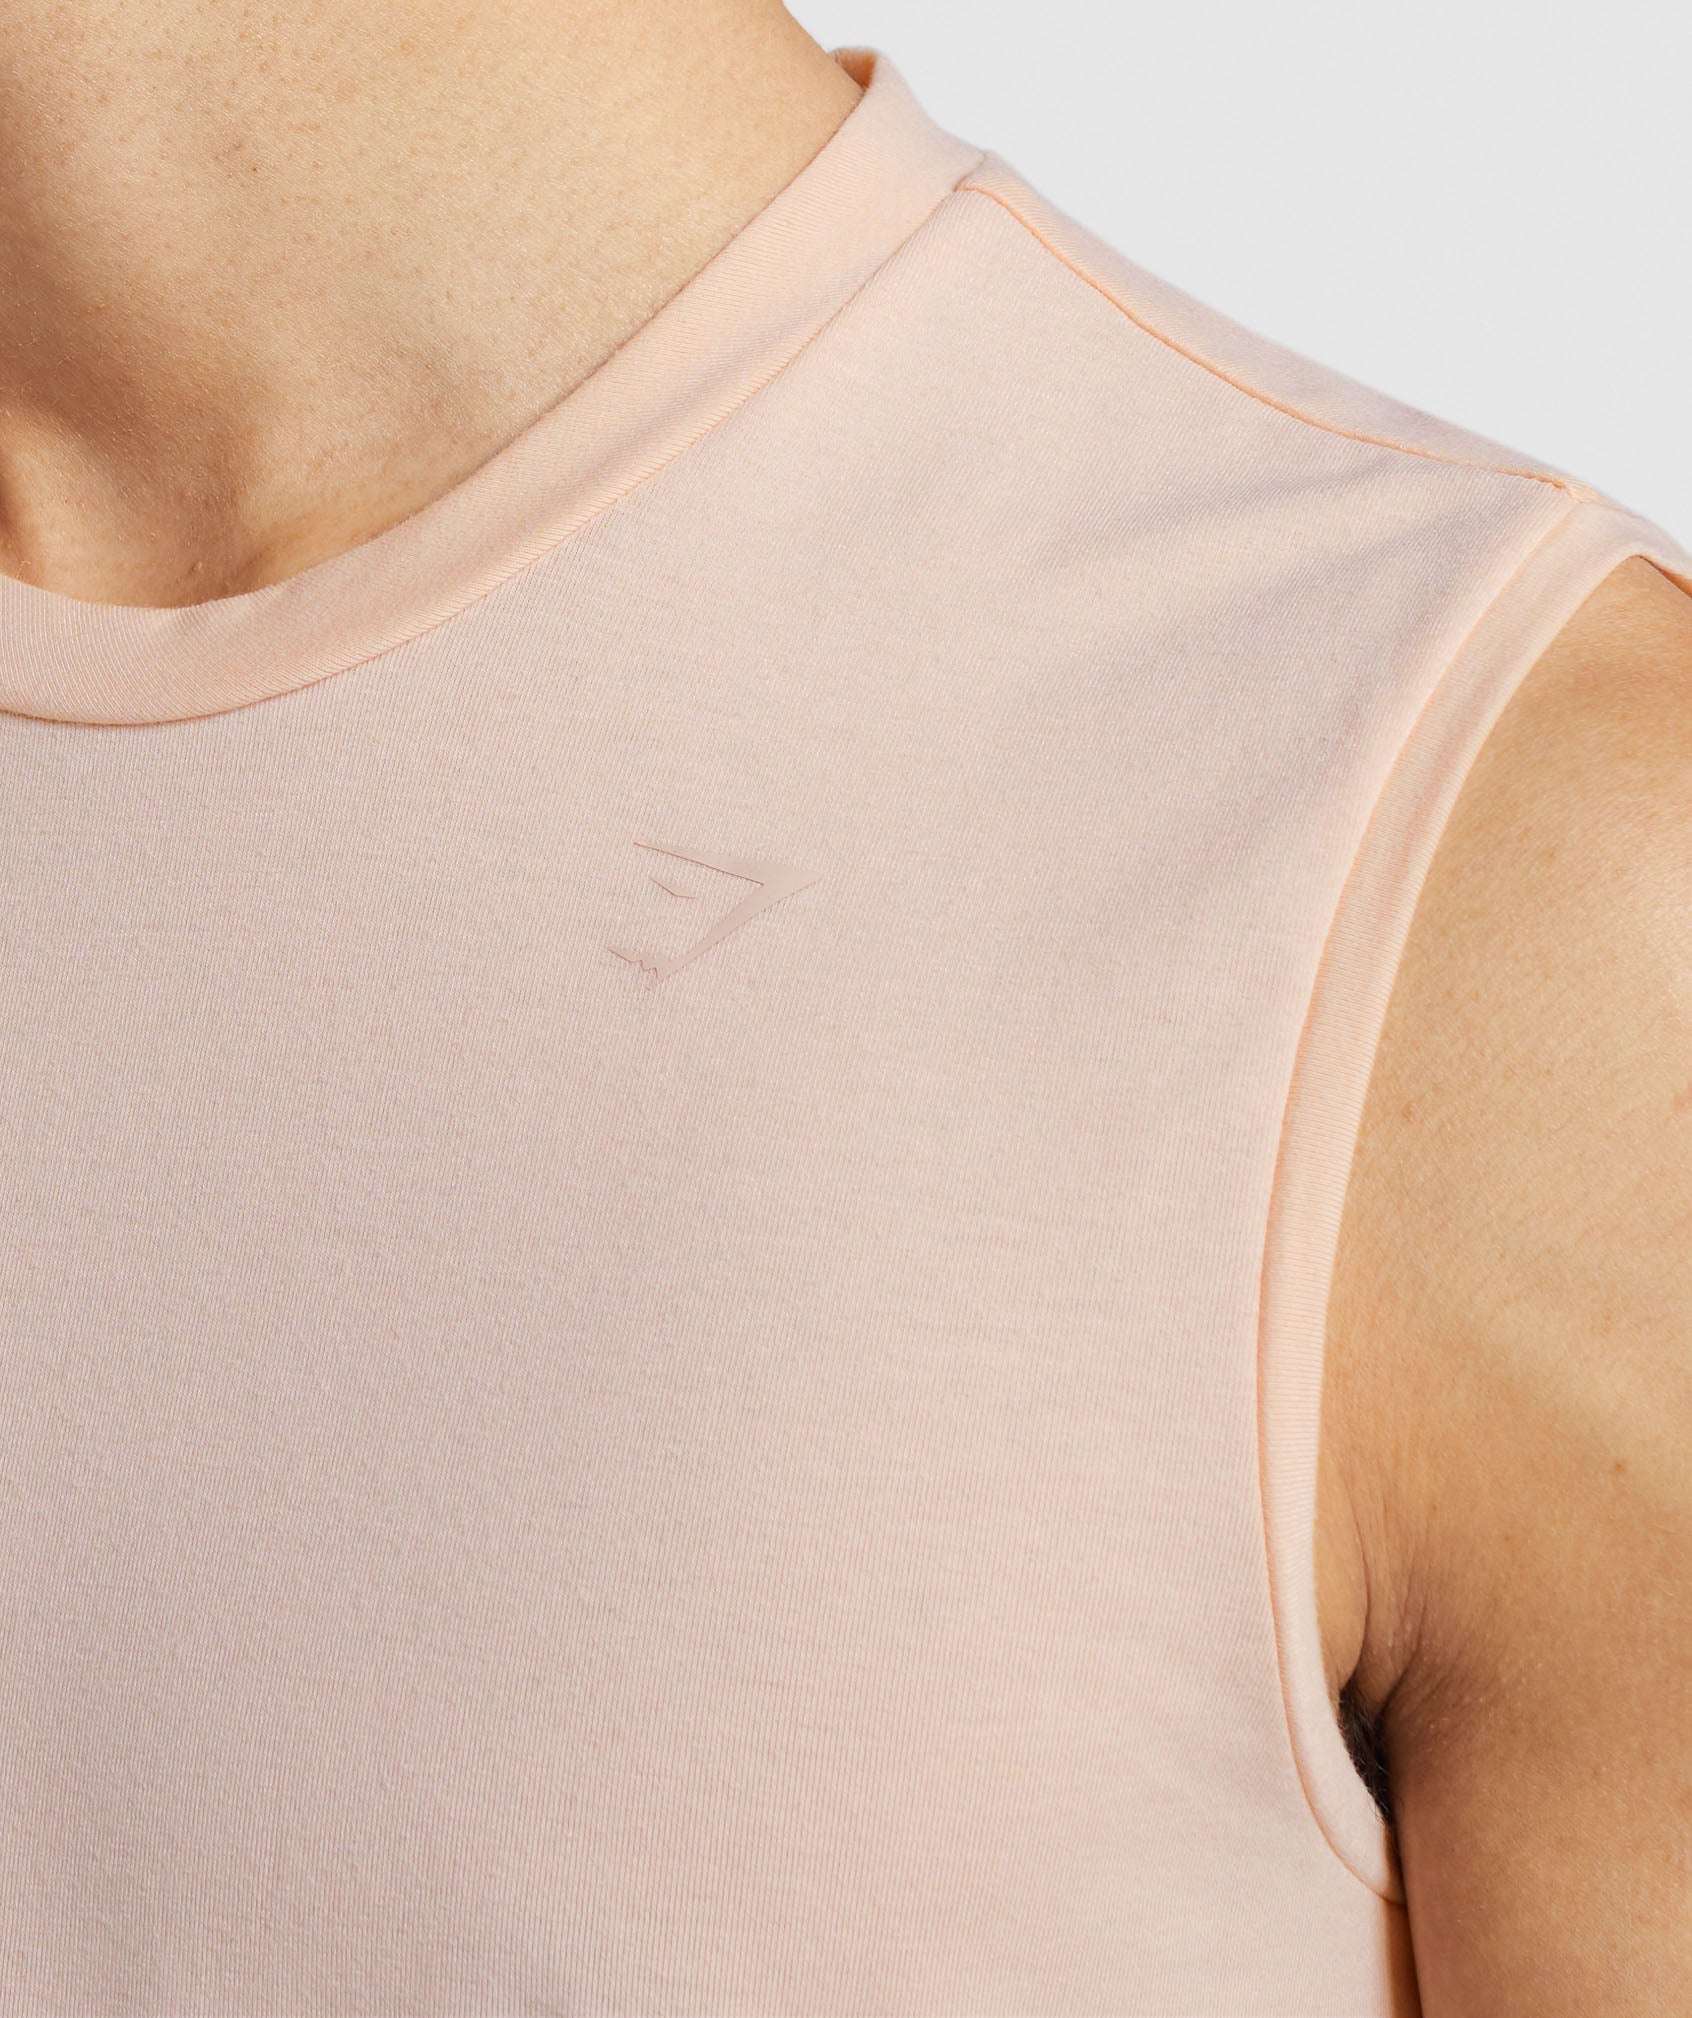 Studio Amplify Tank in Orchid Pink - view 5